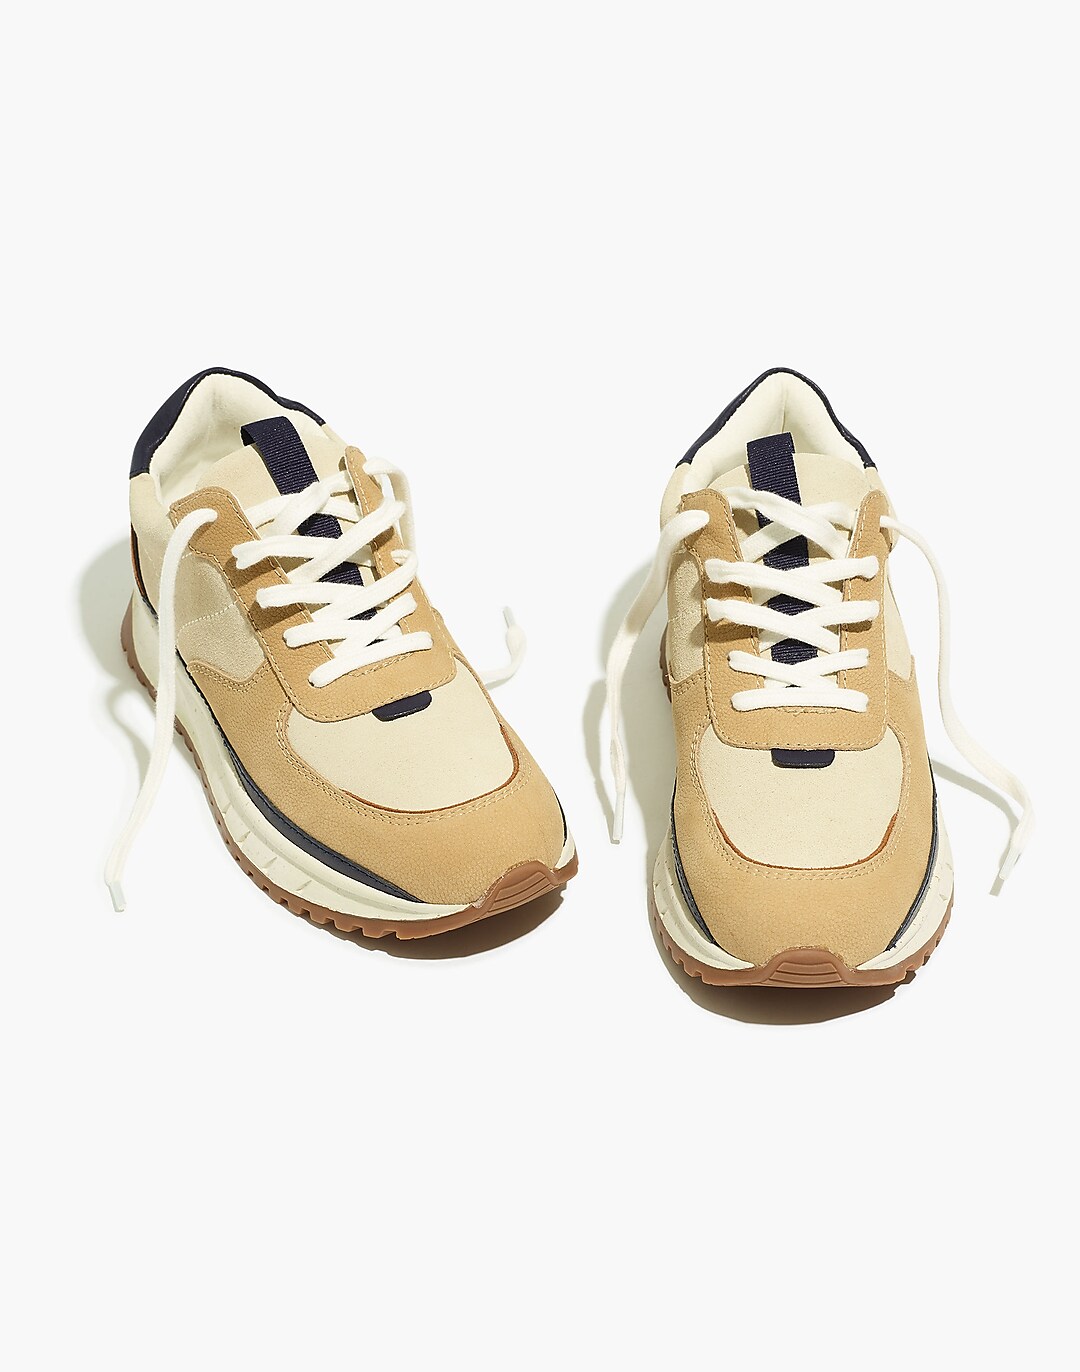 Kickoff Trainer Sneakers in Suede and Nubuck